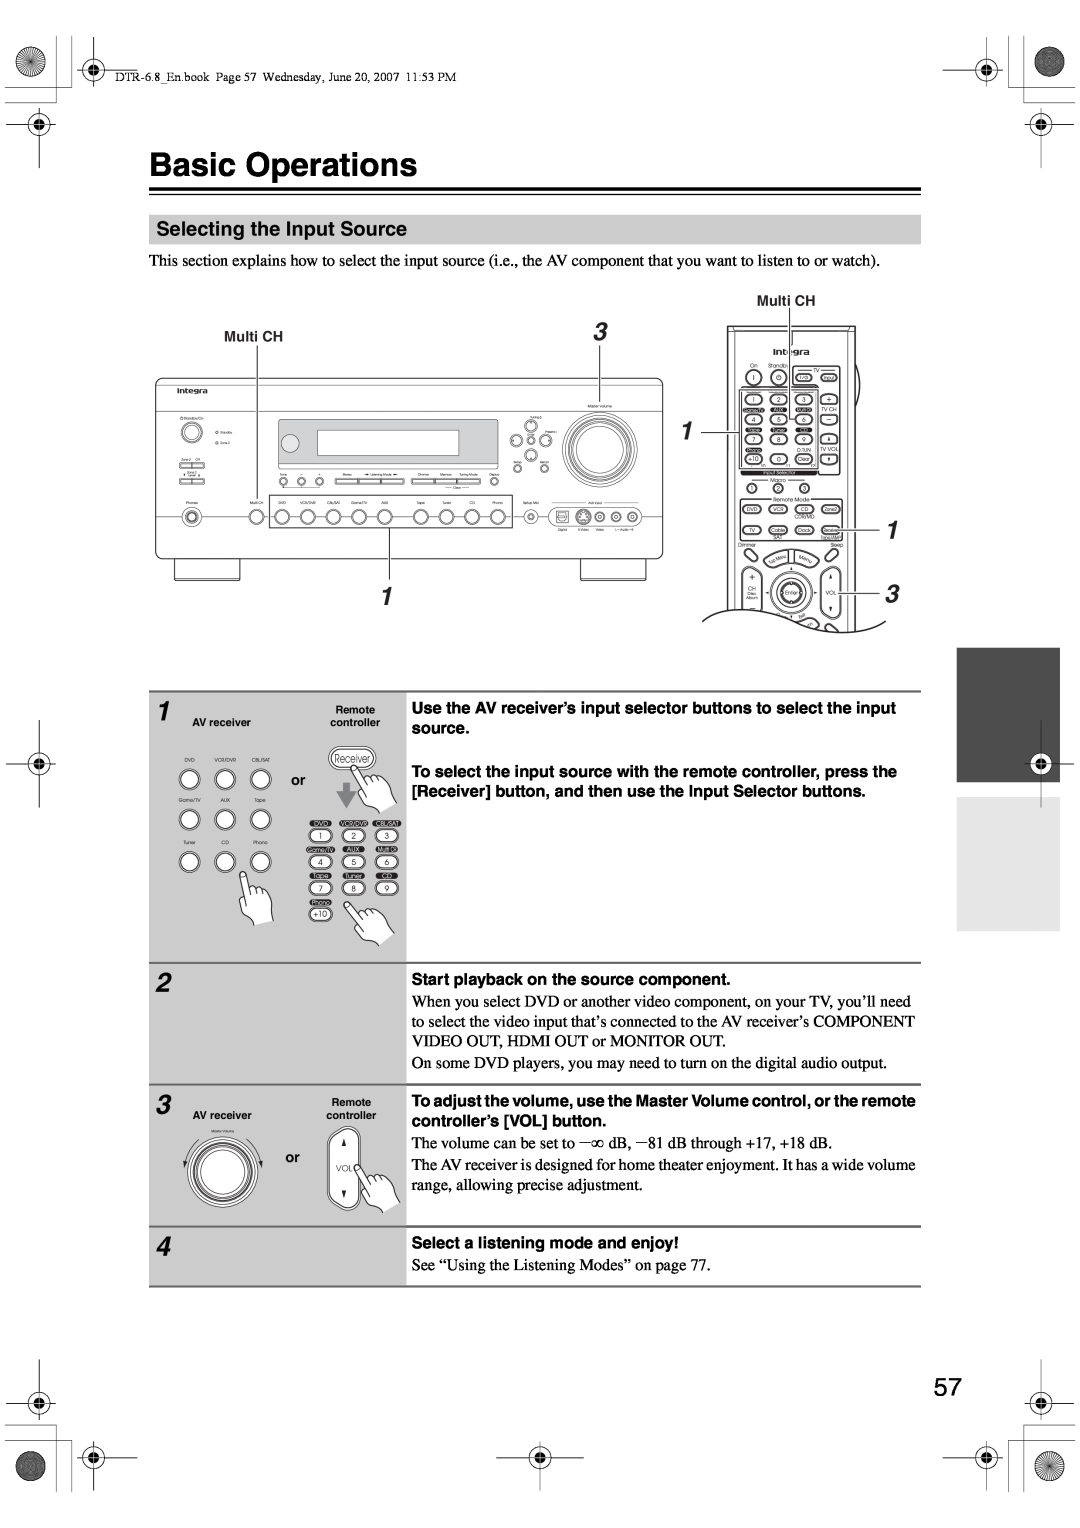 Integra DTR-6.8 instruction manual Basic Operations, Selecting the Input Source 